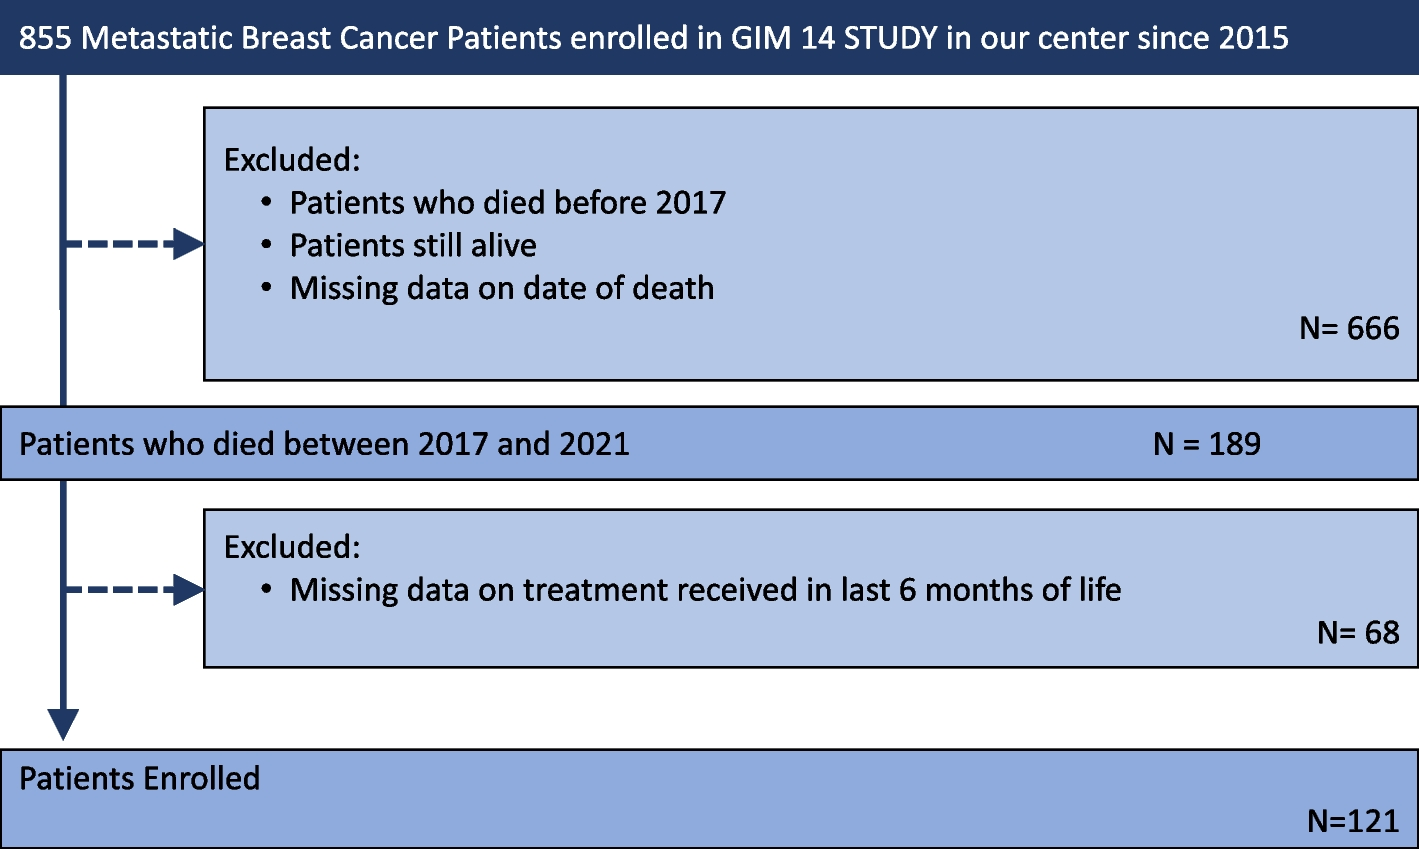 Patterns of care at the end of life: a retrospective study of Italian patients with advanced breast cancer